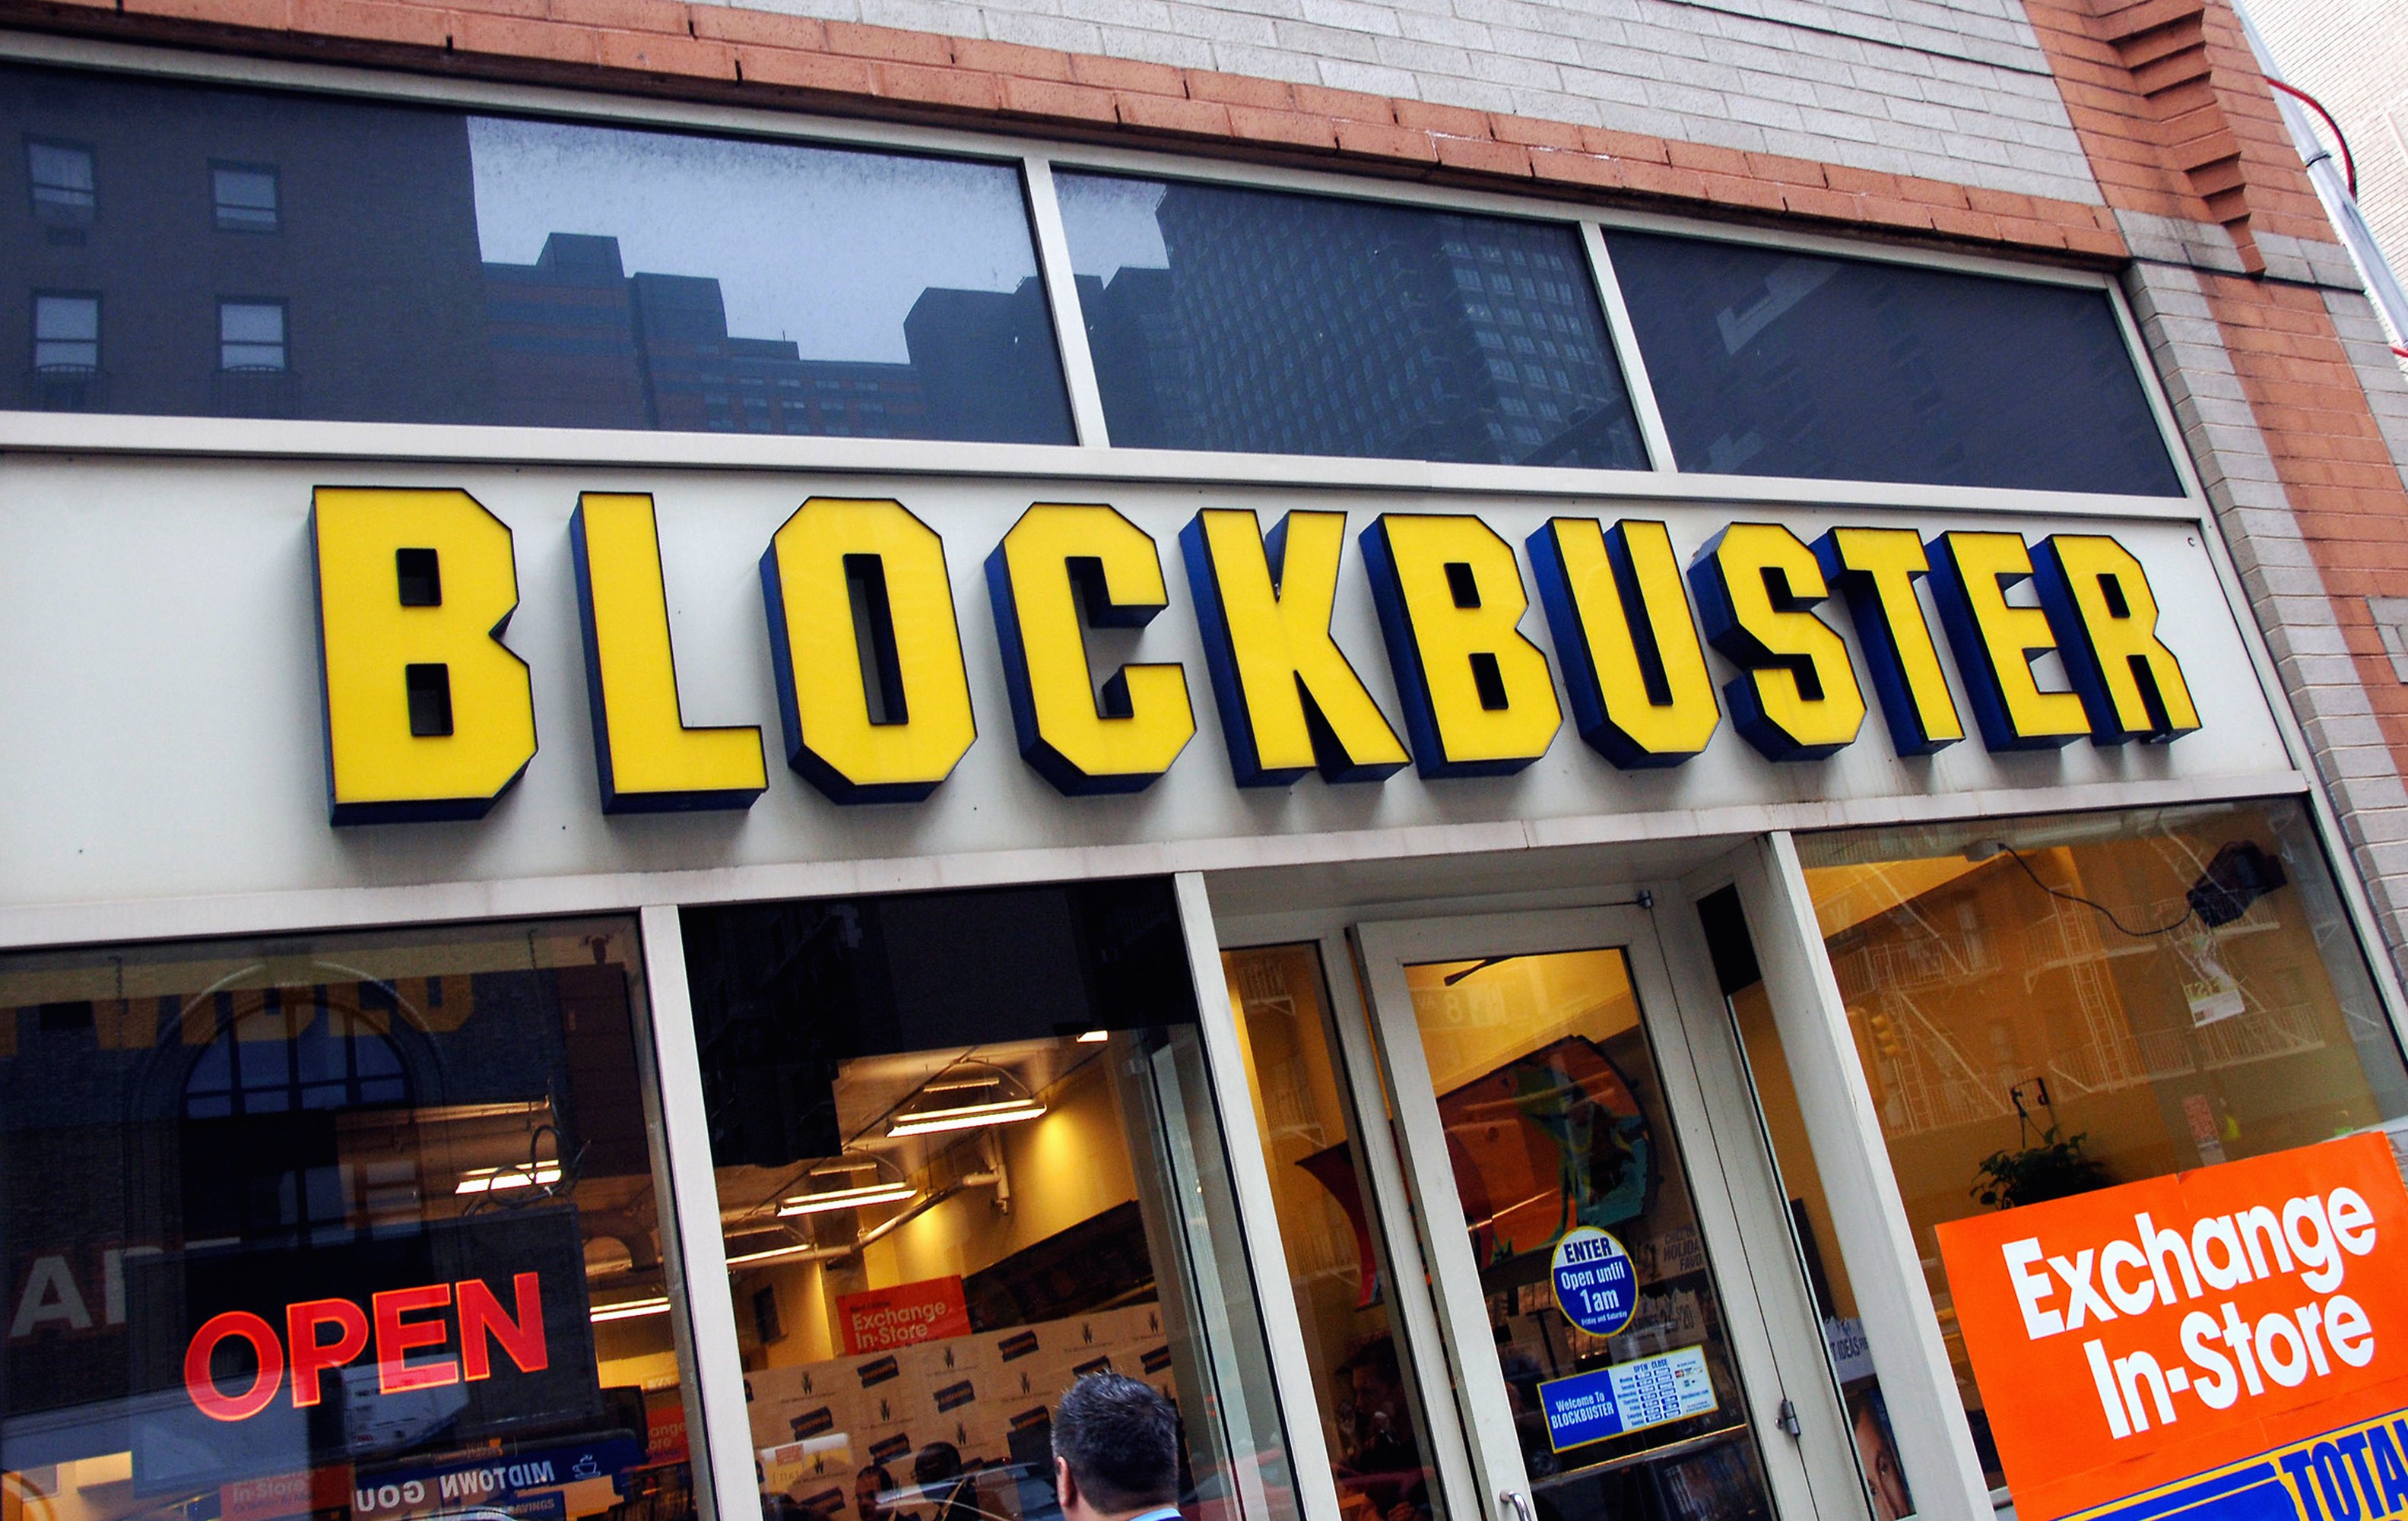 Netflix To Release Documentary About The Last  Blockbuster After Killing Their Company